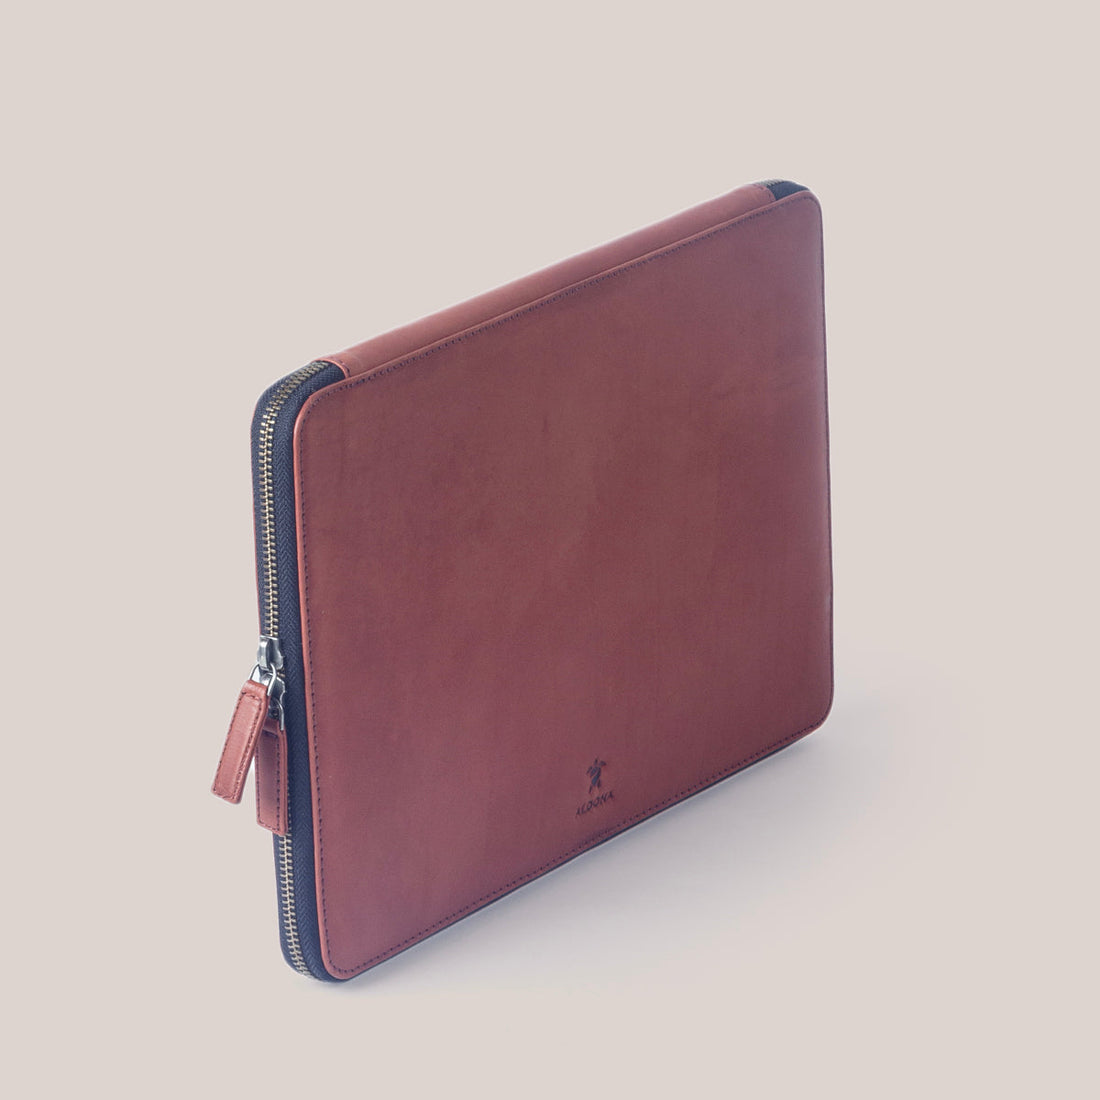 Microsoft Surface Book 15 Zippered Laptop Case - Burnt Tobacco